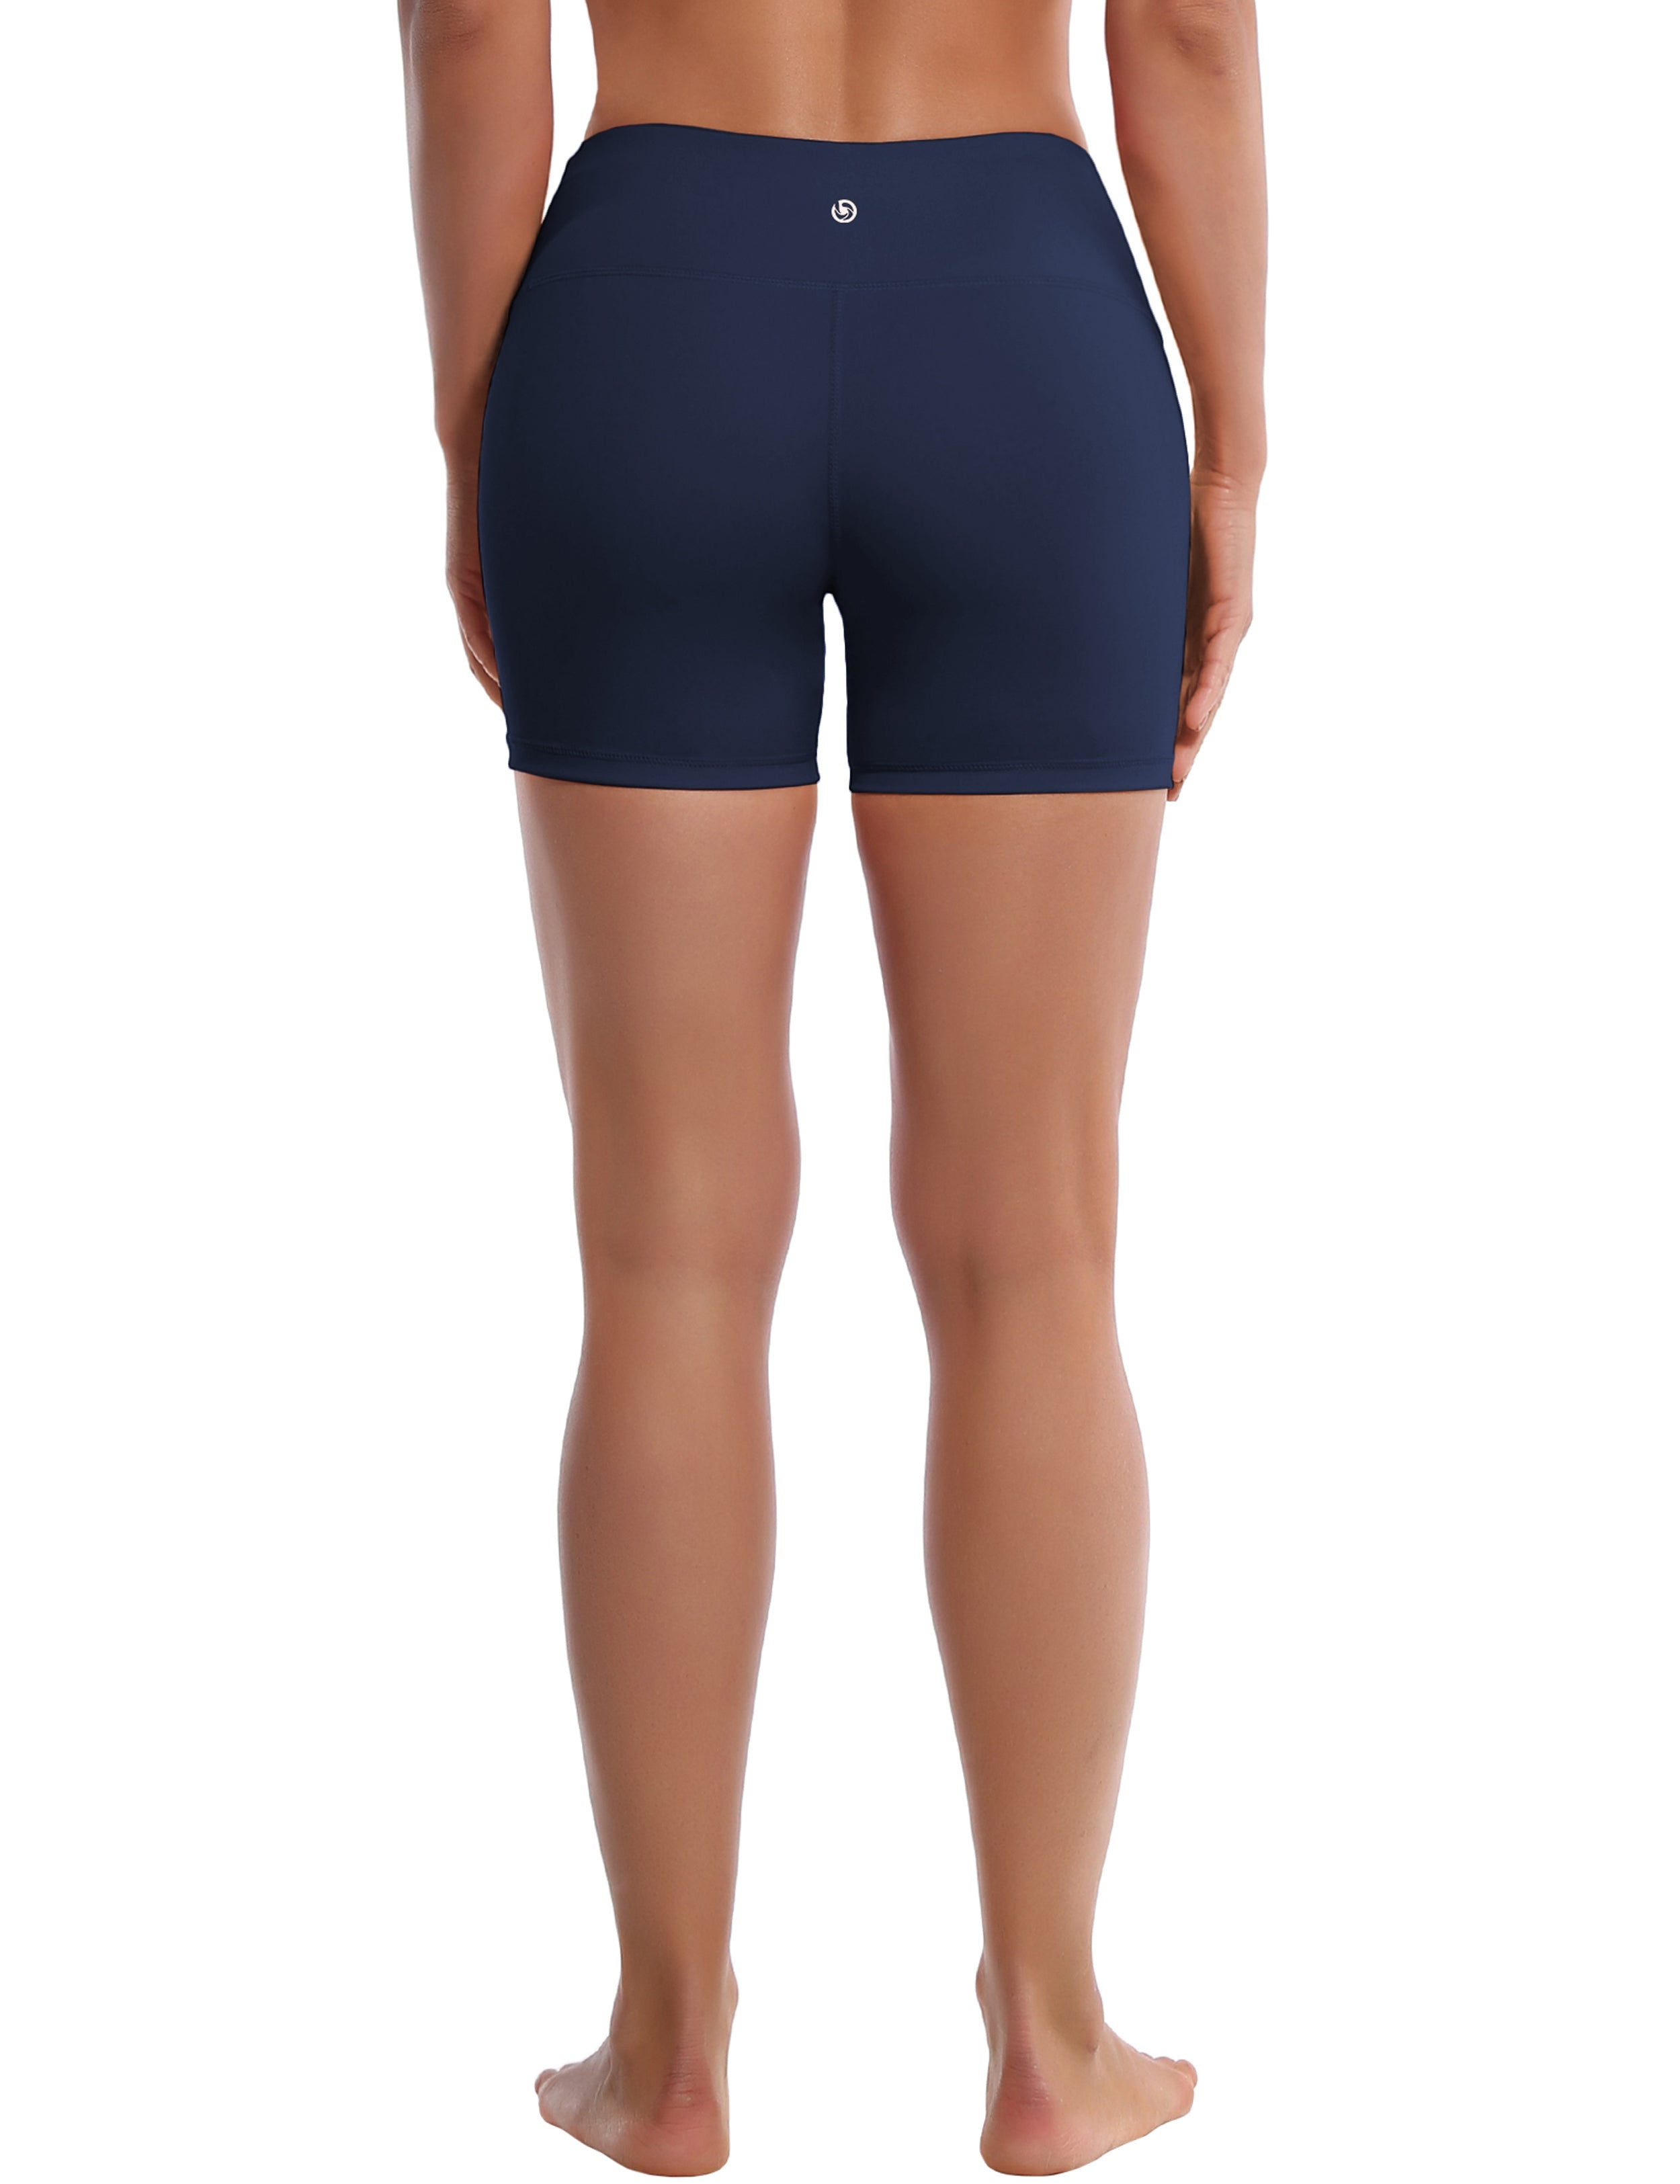 4" Golf Shorts darknavy Sleek, soft, smooth and totally comfortable: our newest style is here. Softest-ever fabric High elasticity High density 4-way stretch Fabric doesn't attract lint easily No see-through Moisture-wicking Machine wash 75% Nylon, 25% Spandex